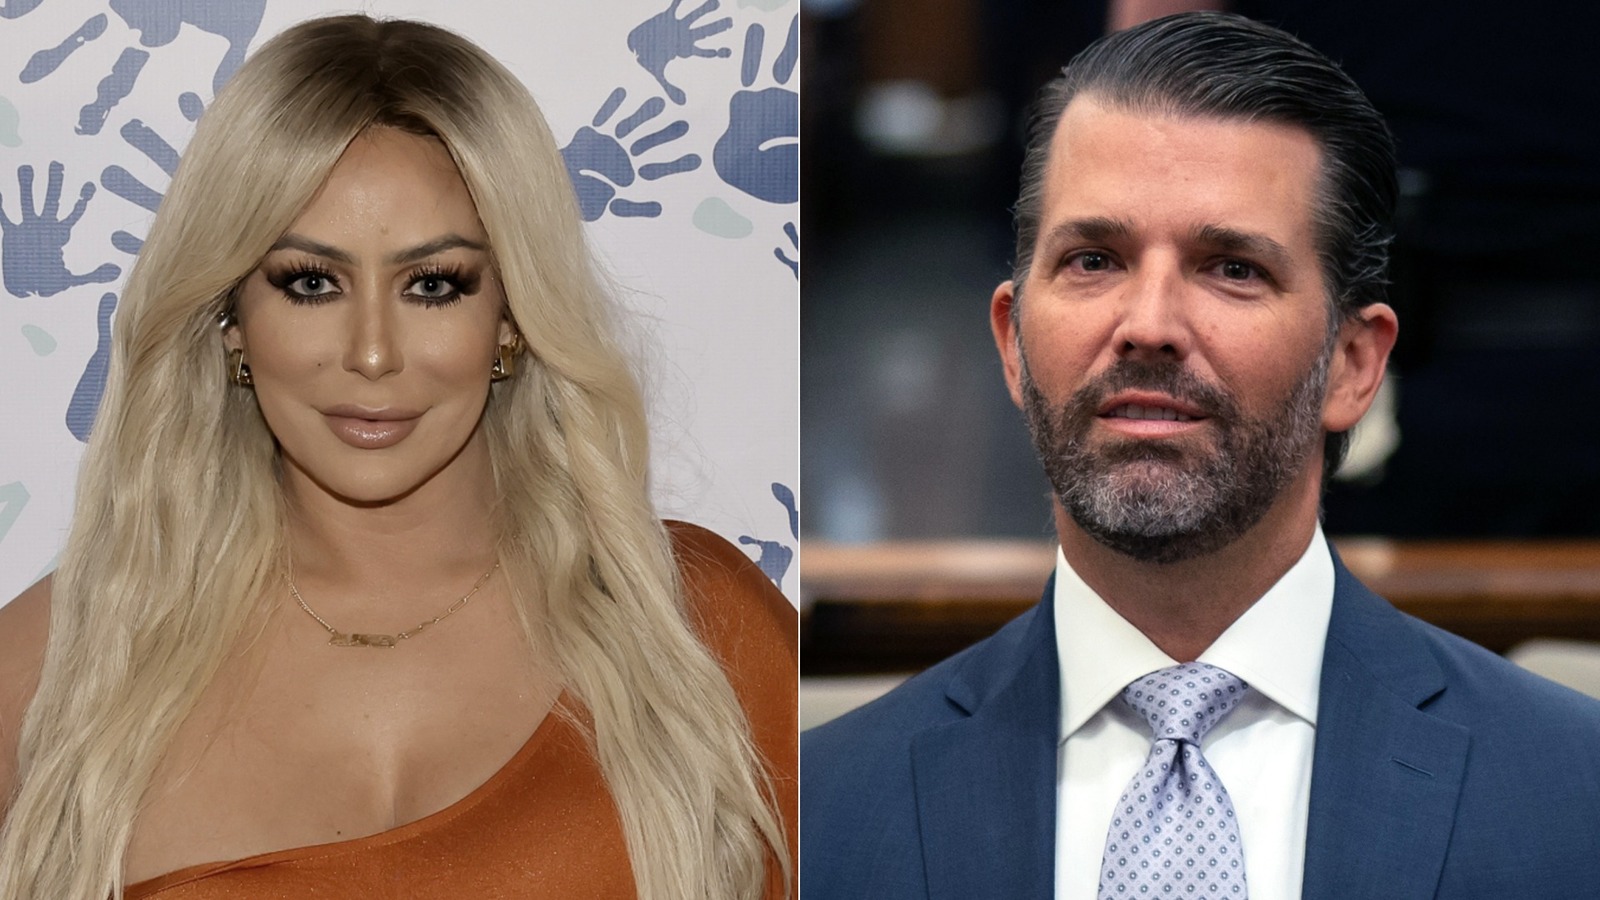 The Complete Timeline Of Aubrey Odays Alleged Affair With Donald Trump Jr